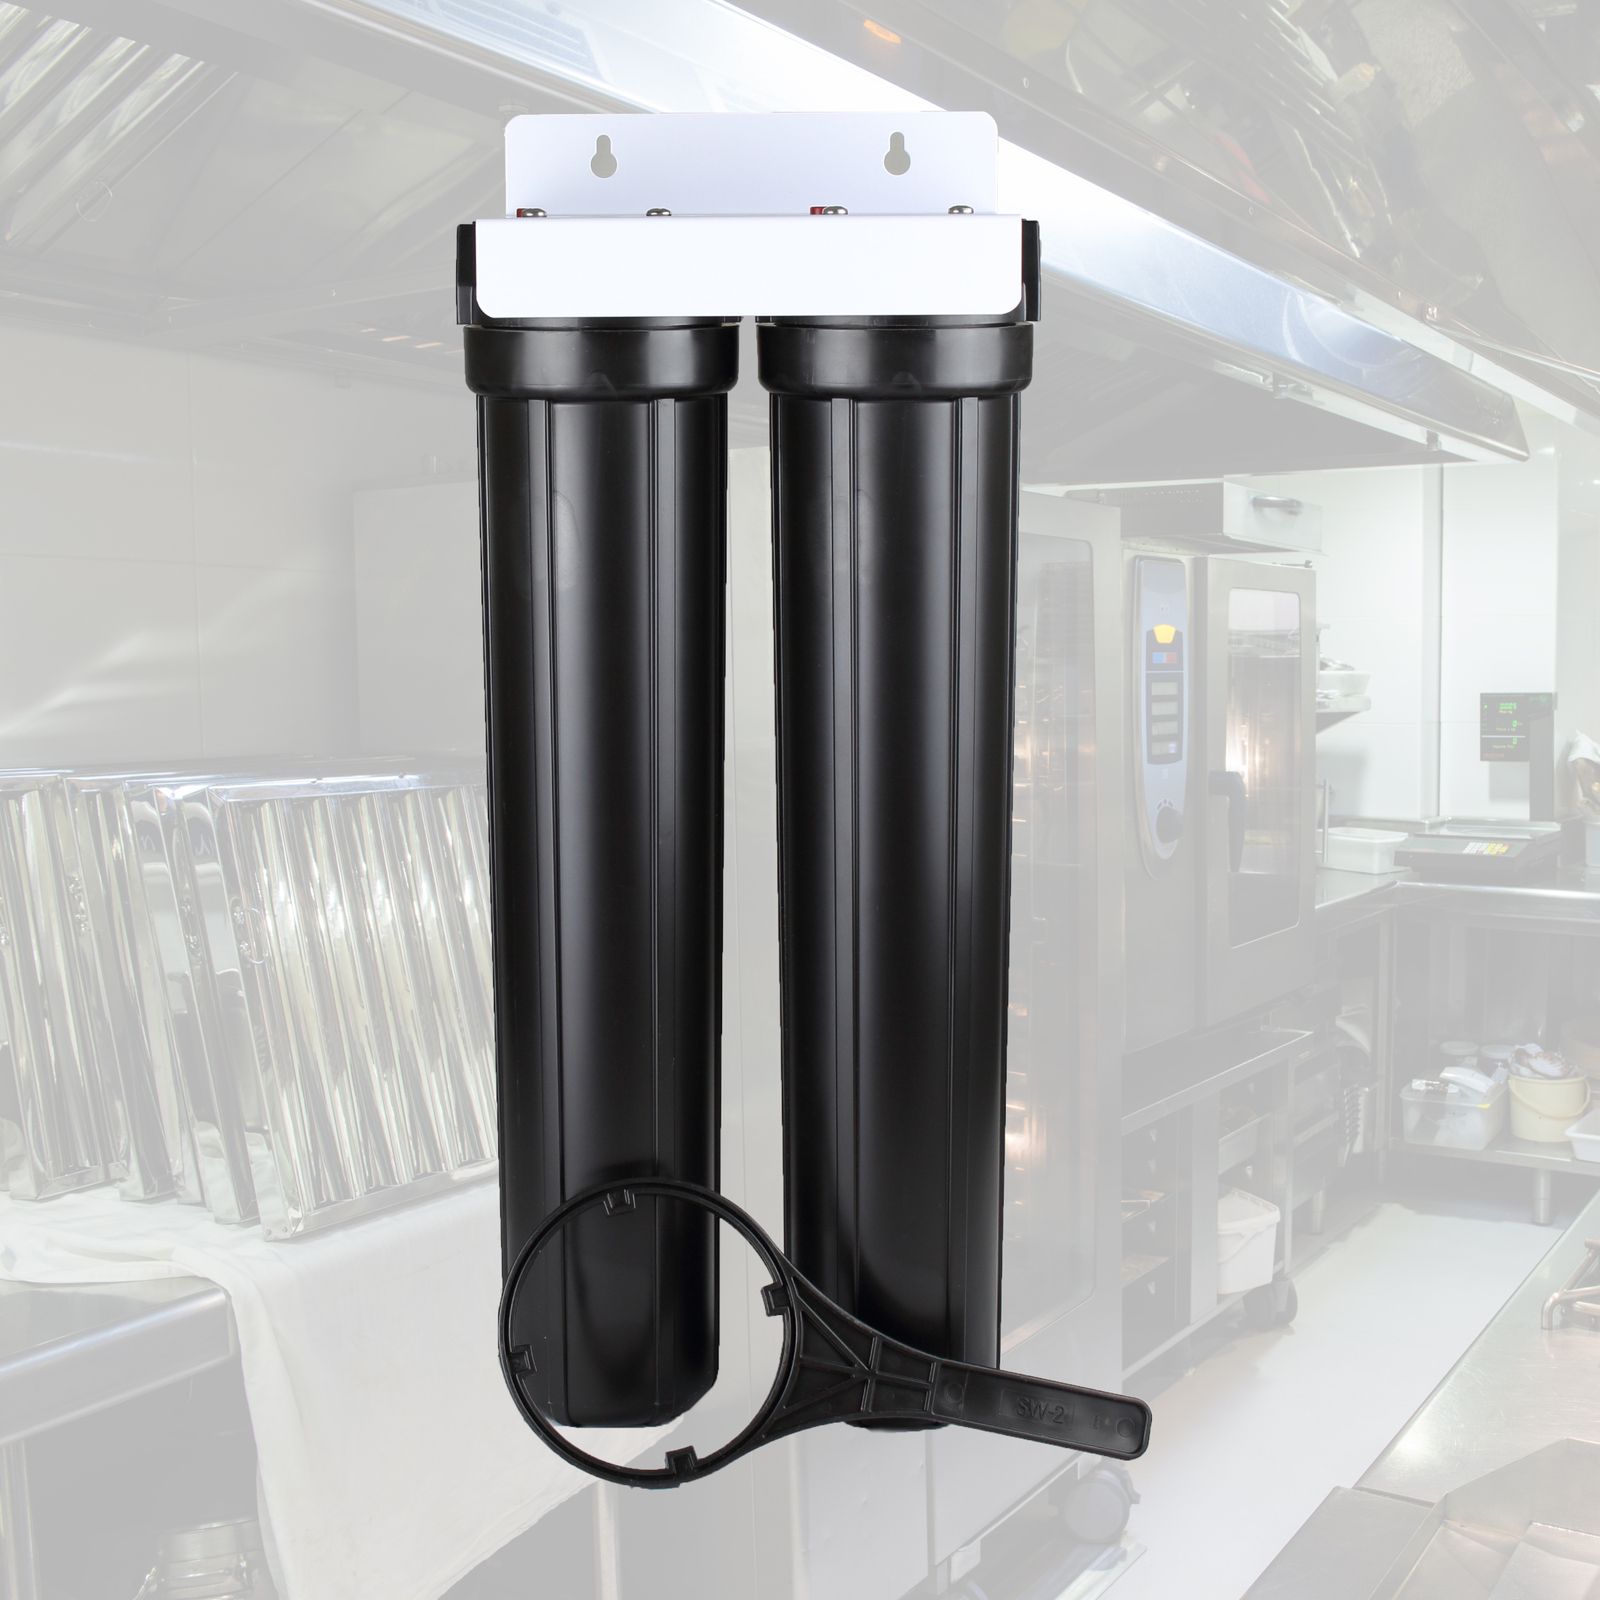 Steam Oven Filter System | Water Filtration System | Aquastream.com.au